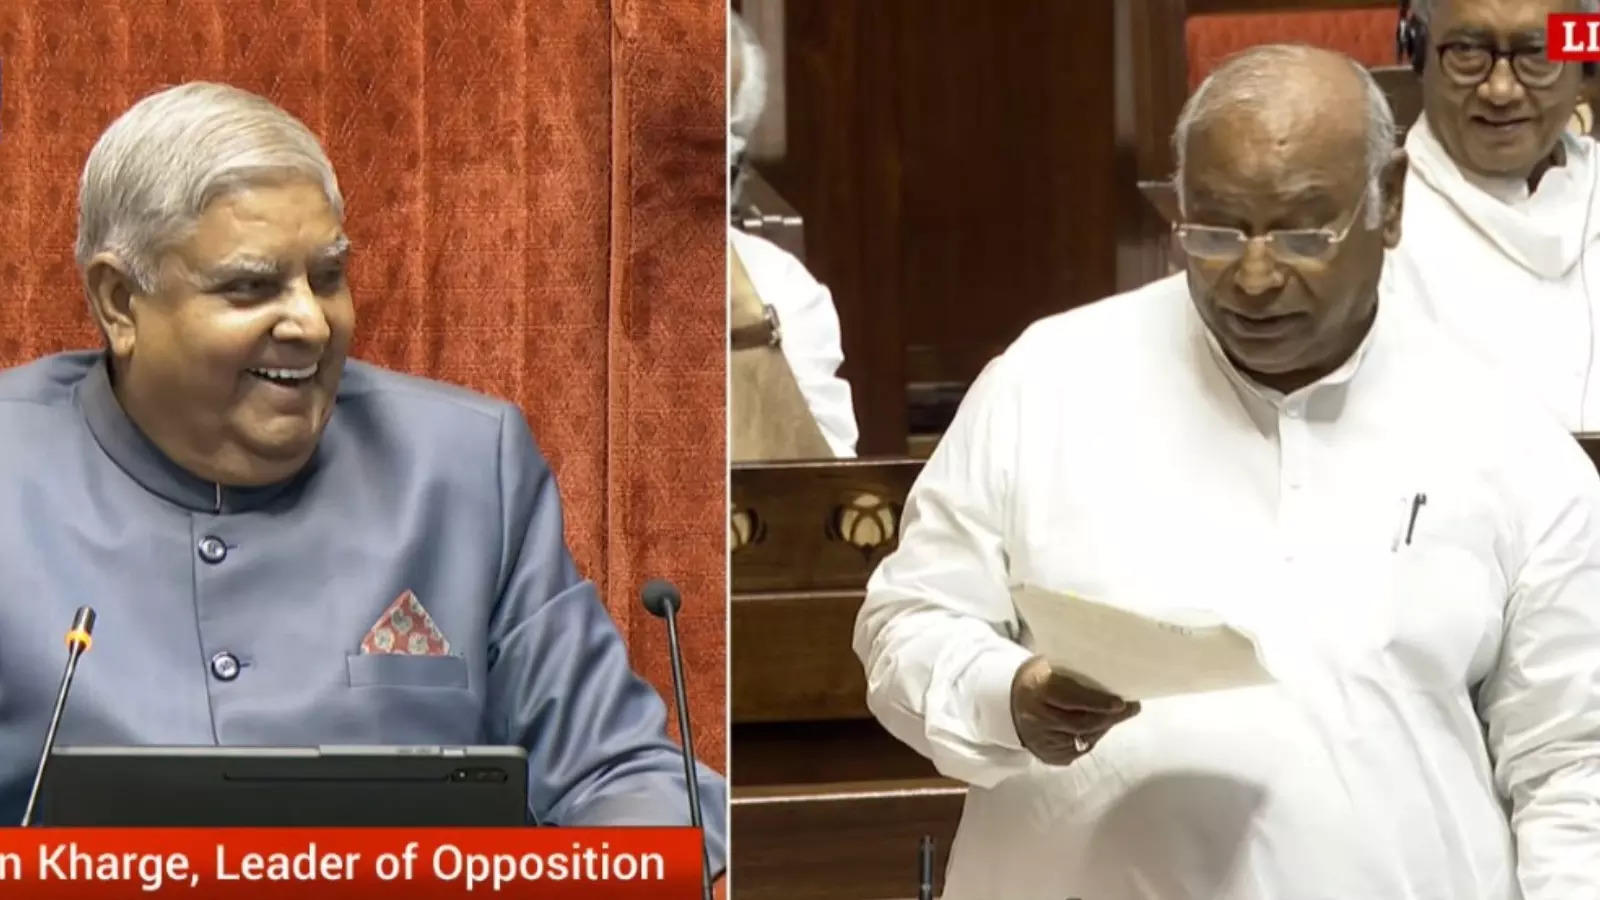 What did Mallikarjun Kharge say that Chairman Dhankhar started laughing loudly, then the atmosphere of the house changed